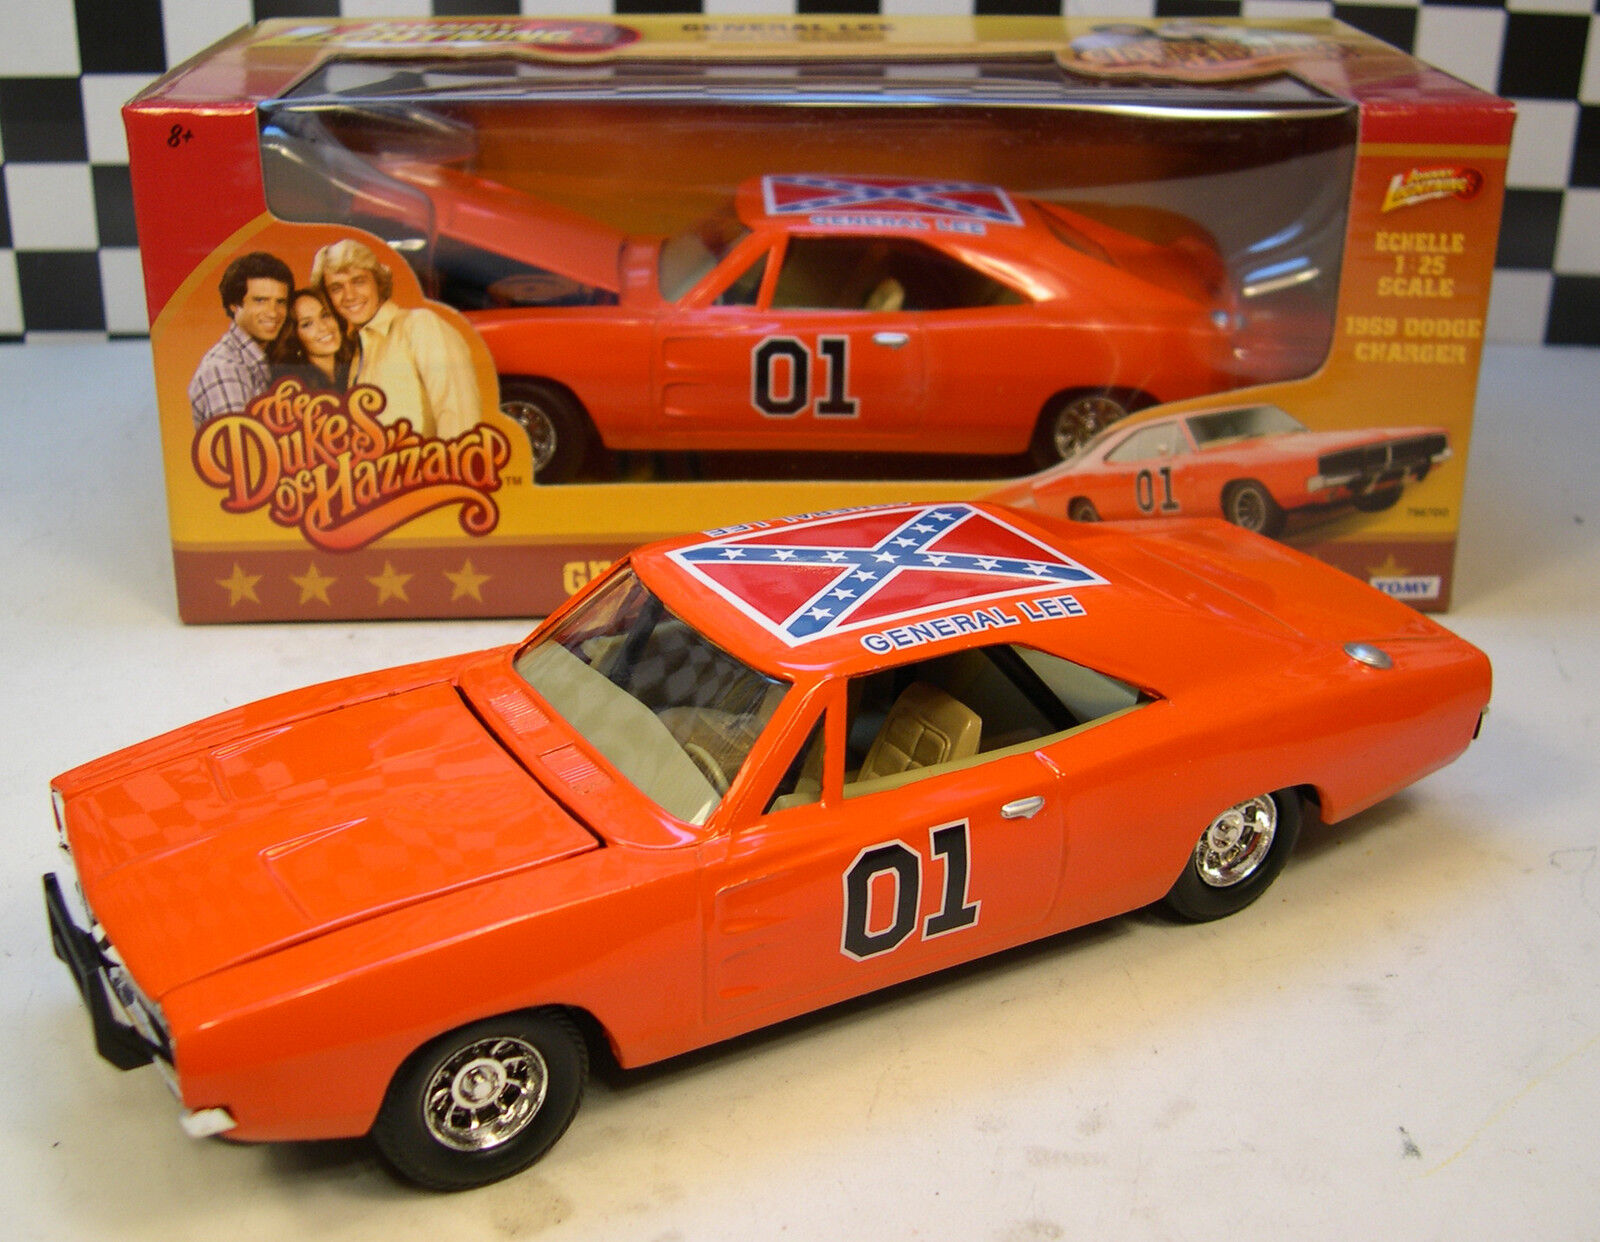 1:25 SCALE DUKES OF HAZZARD GENERAL LEE ORANGE 1969 DODGE CHARGER